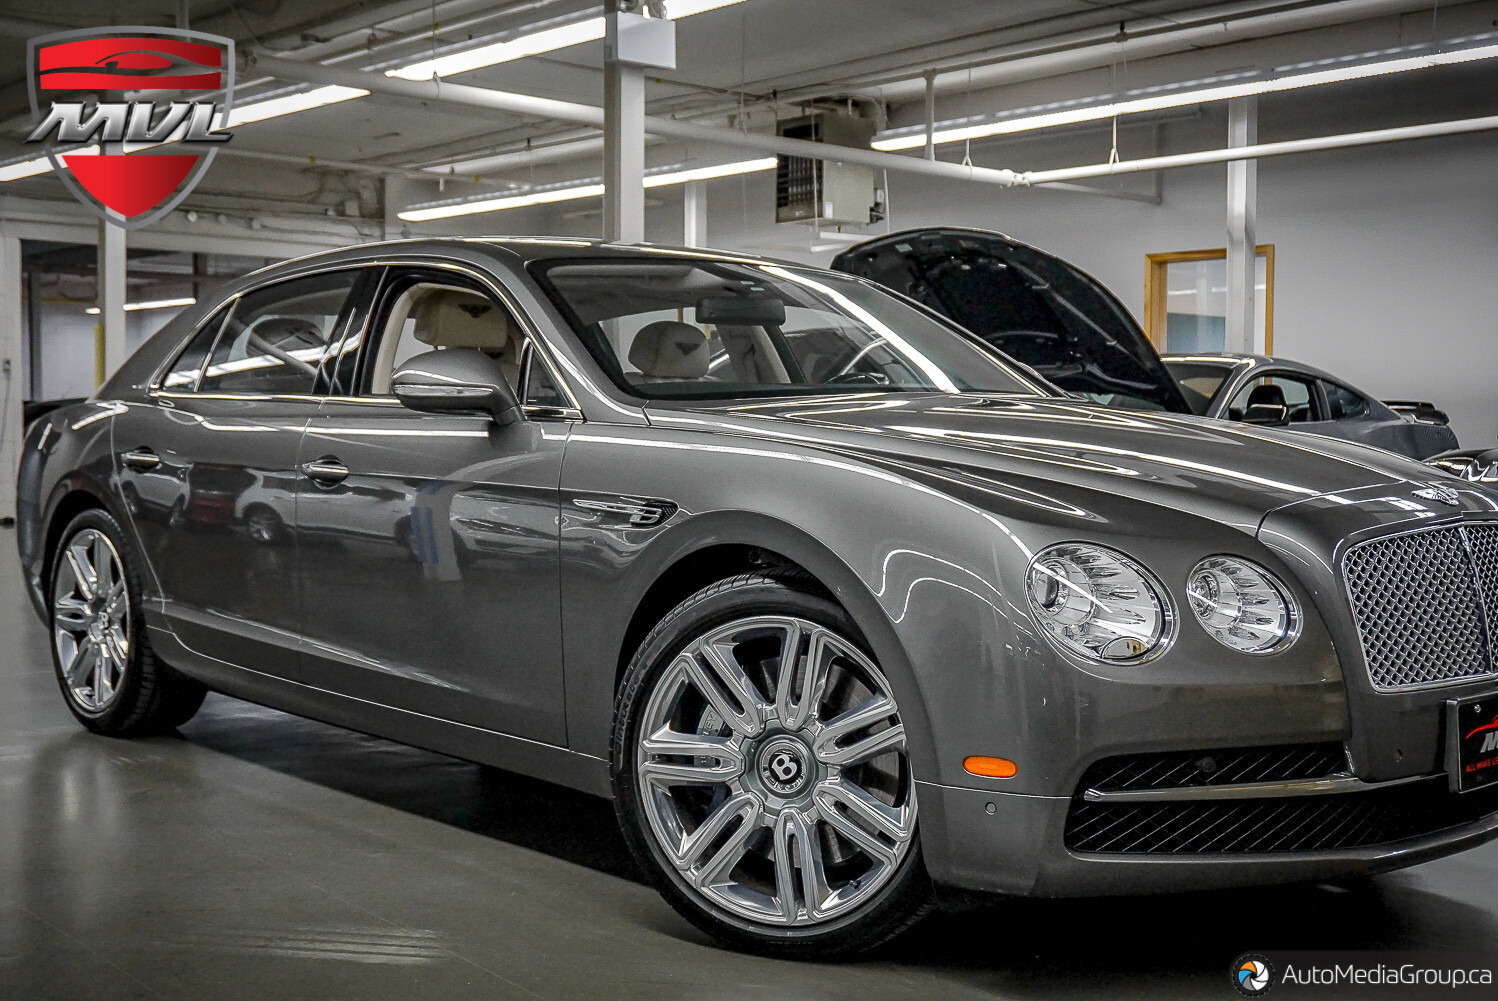 2016 Bentley Flying Spur W12 -7.99% LEASE RATE- MULLINER, W12 TWIN-TURBO